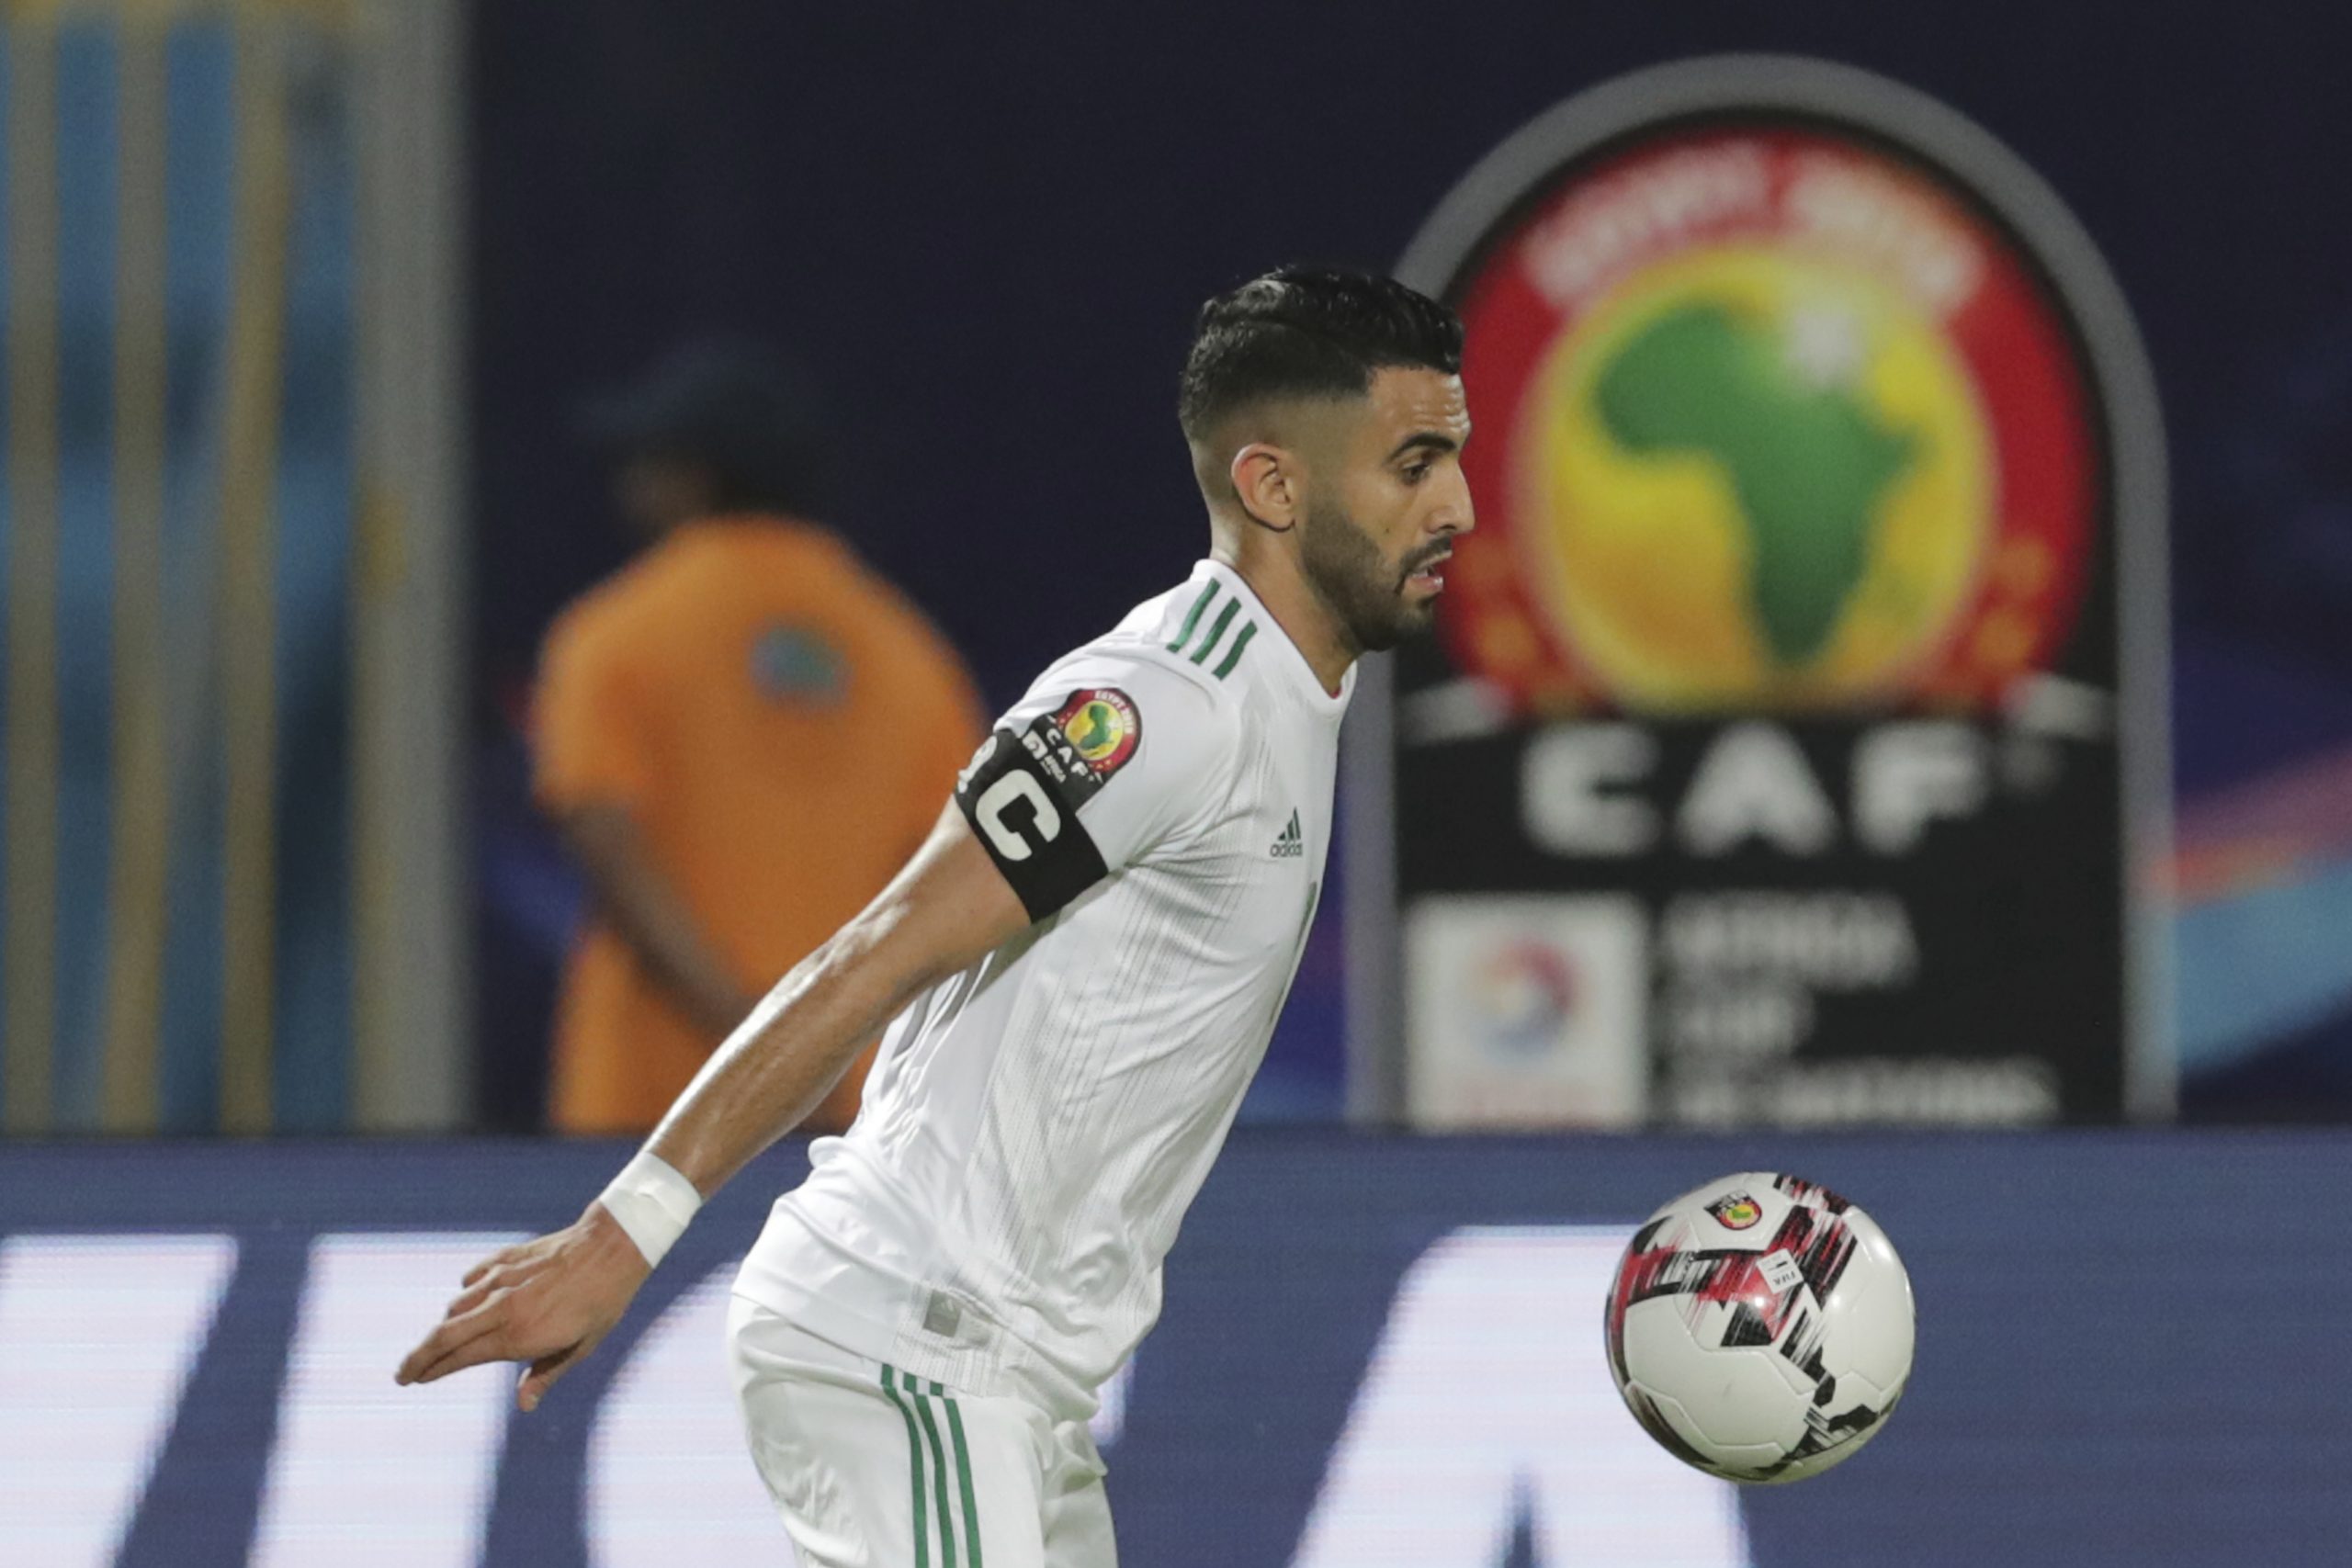 Algeria's Riyad Mahrez controls the ball during the African Cup of Nations group C soccer match between Algeria and Kenya at 30 June Stadium in Cairo, Egypt, Sunday, June 23, 2019. (AP Photo/Hassan Ammar)